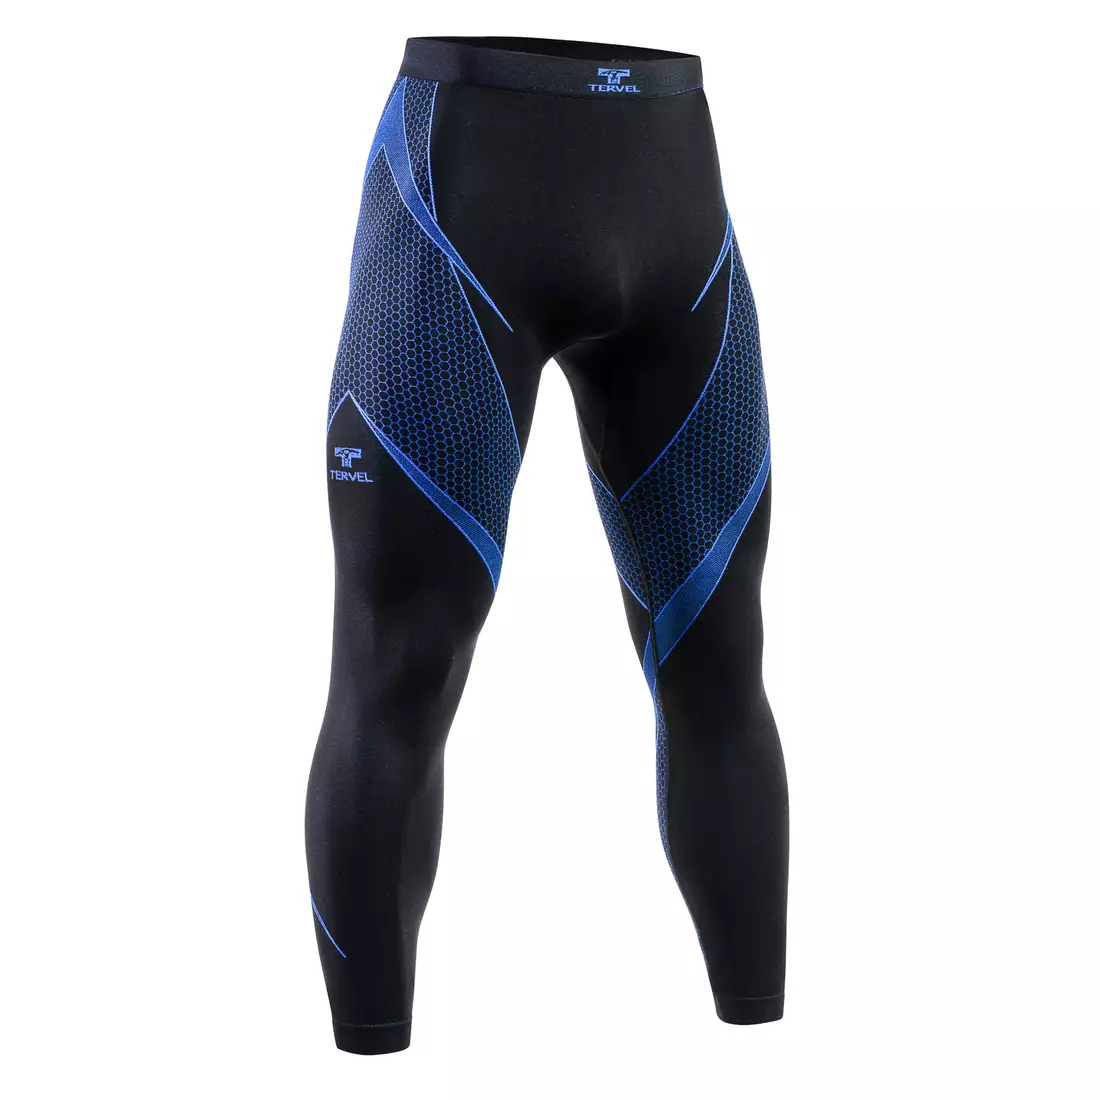 TERVEL OPTILINE OPT 3007 - men's thermoactive leggings, color: black and blue